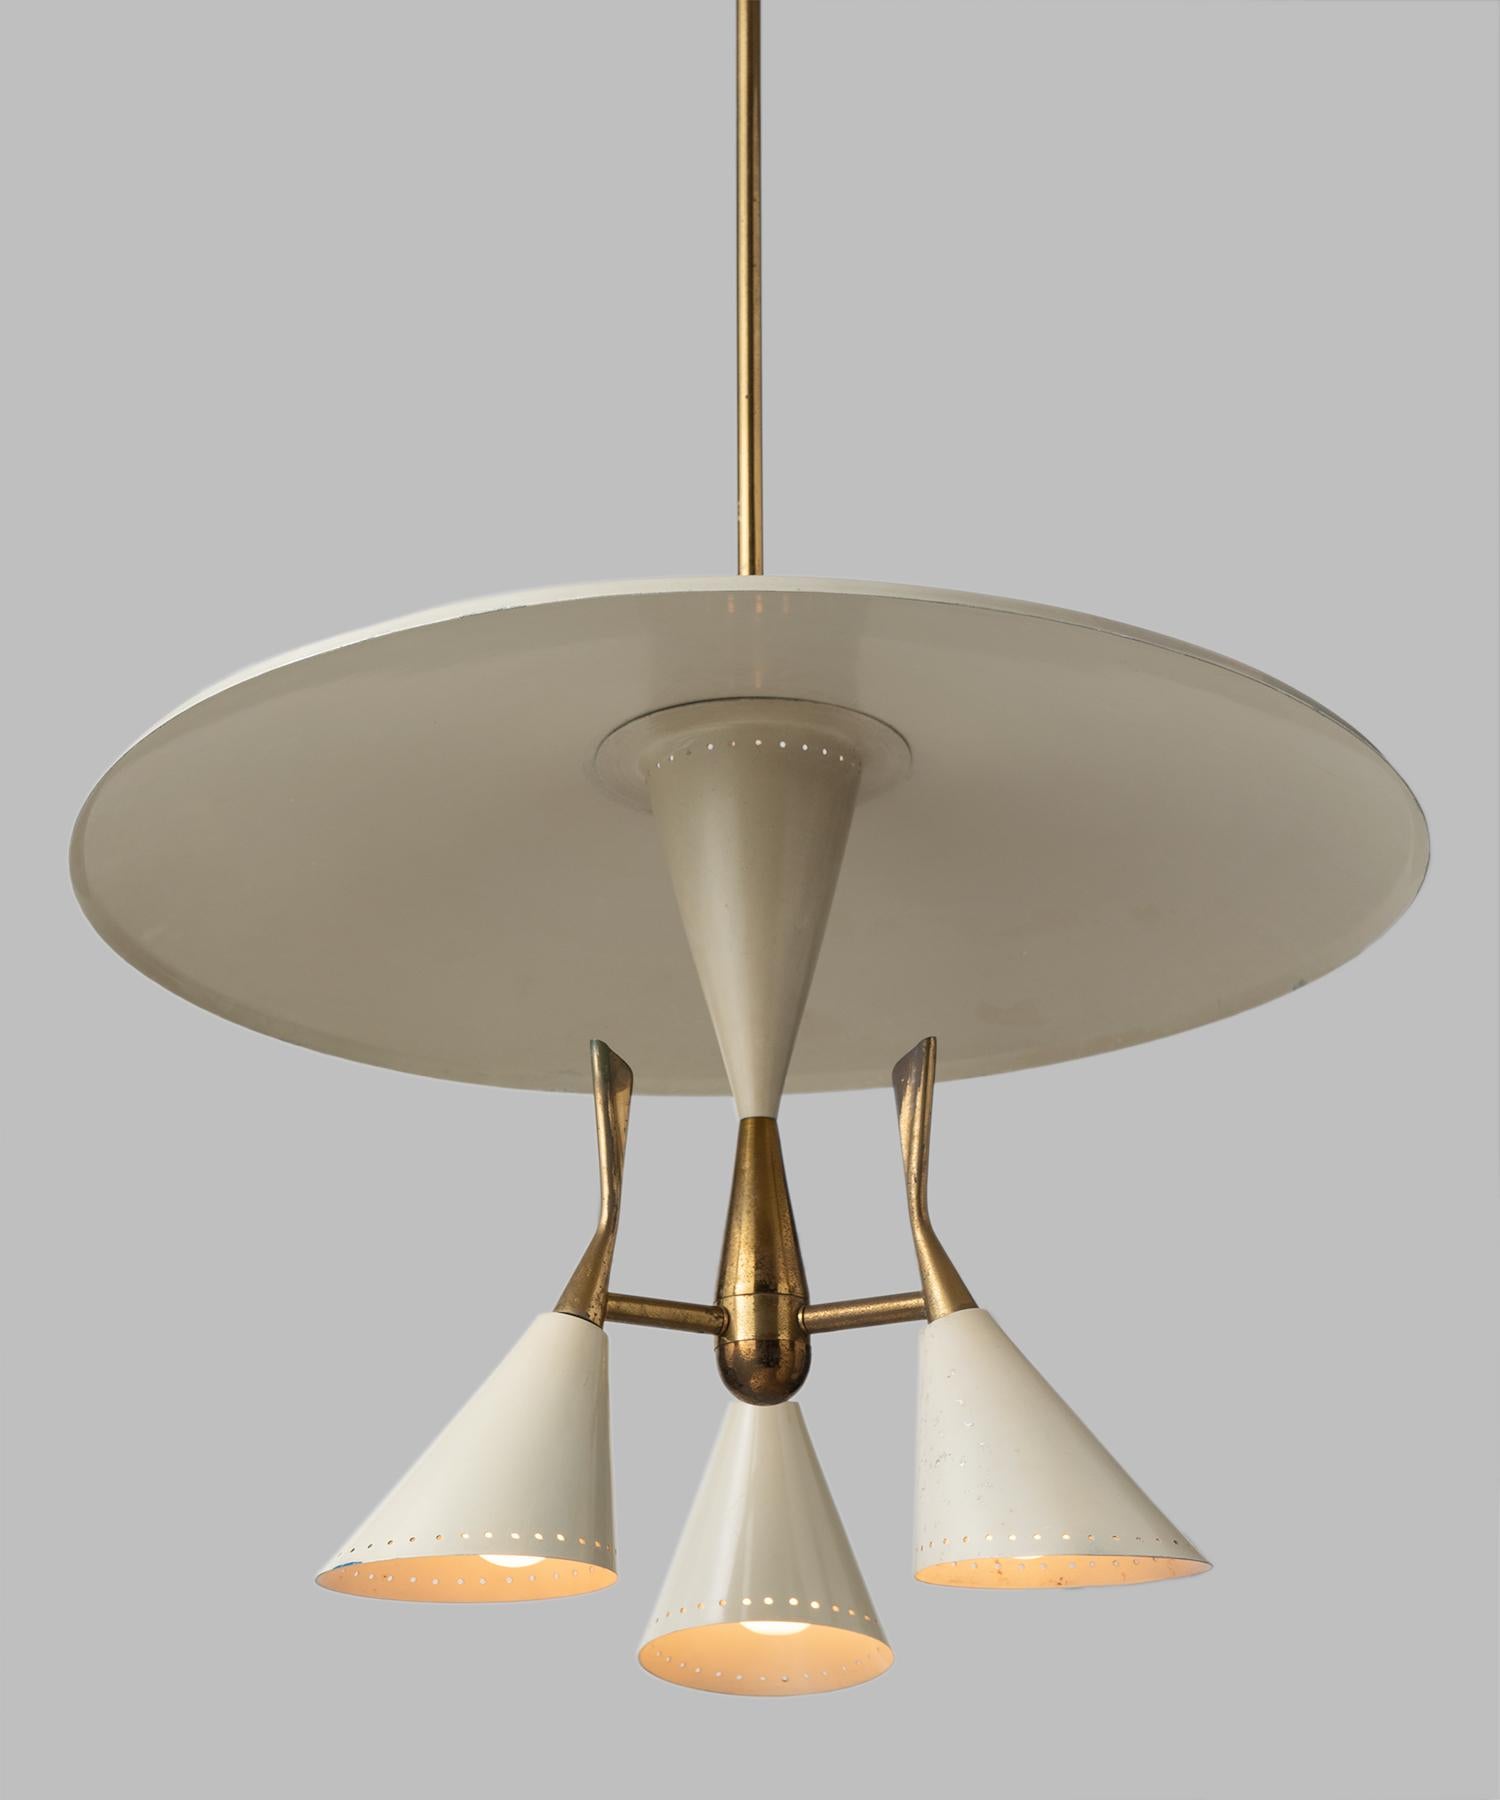 Cream and brass ceiling lamp, Italy, circa 1930.

Modern lamp with three pivoting metal shades and brass detailing. Original brass rod and canopy.

Measures: 24